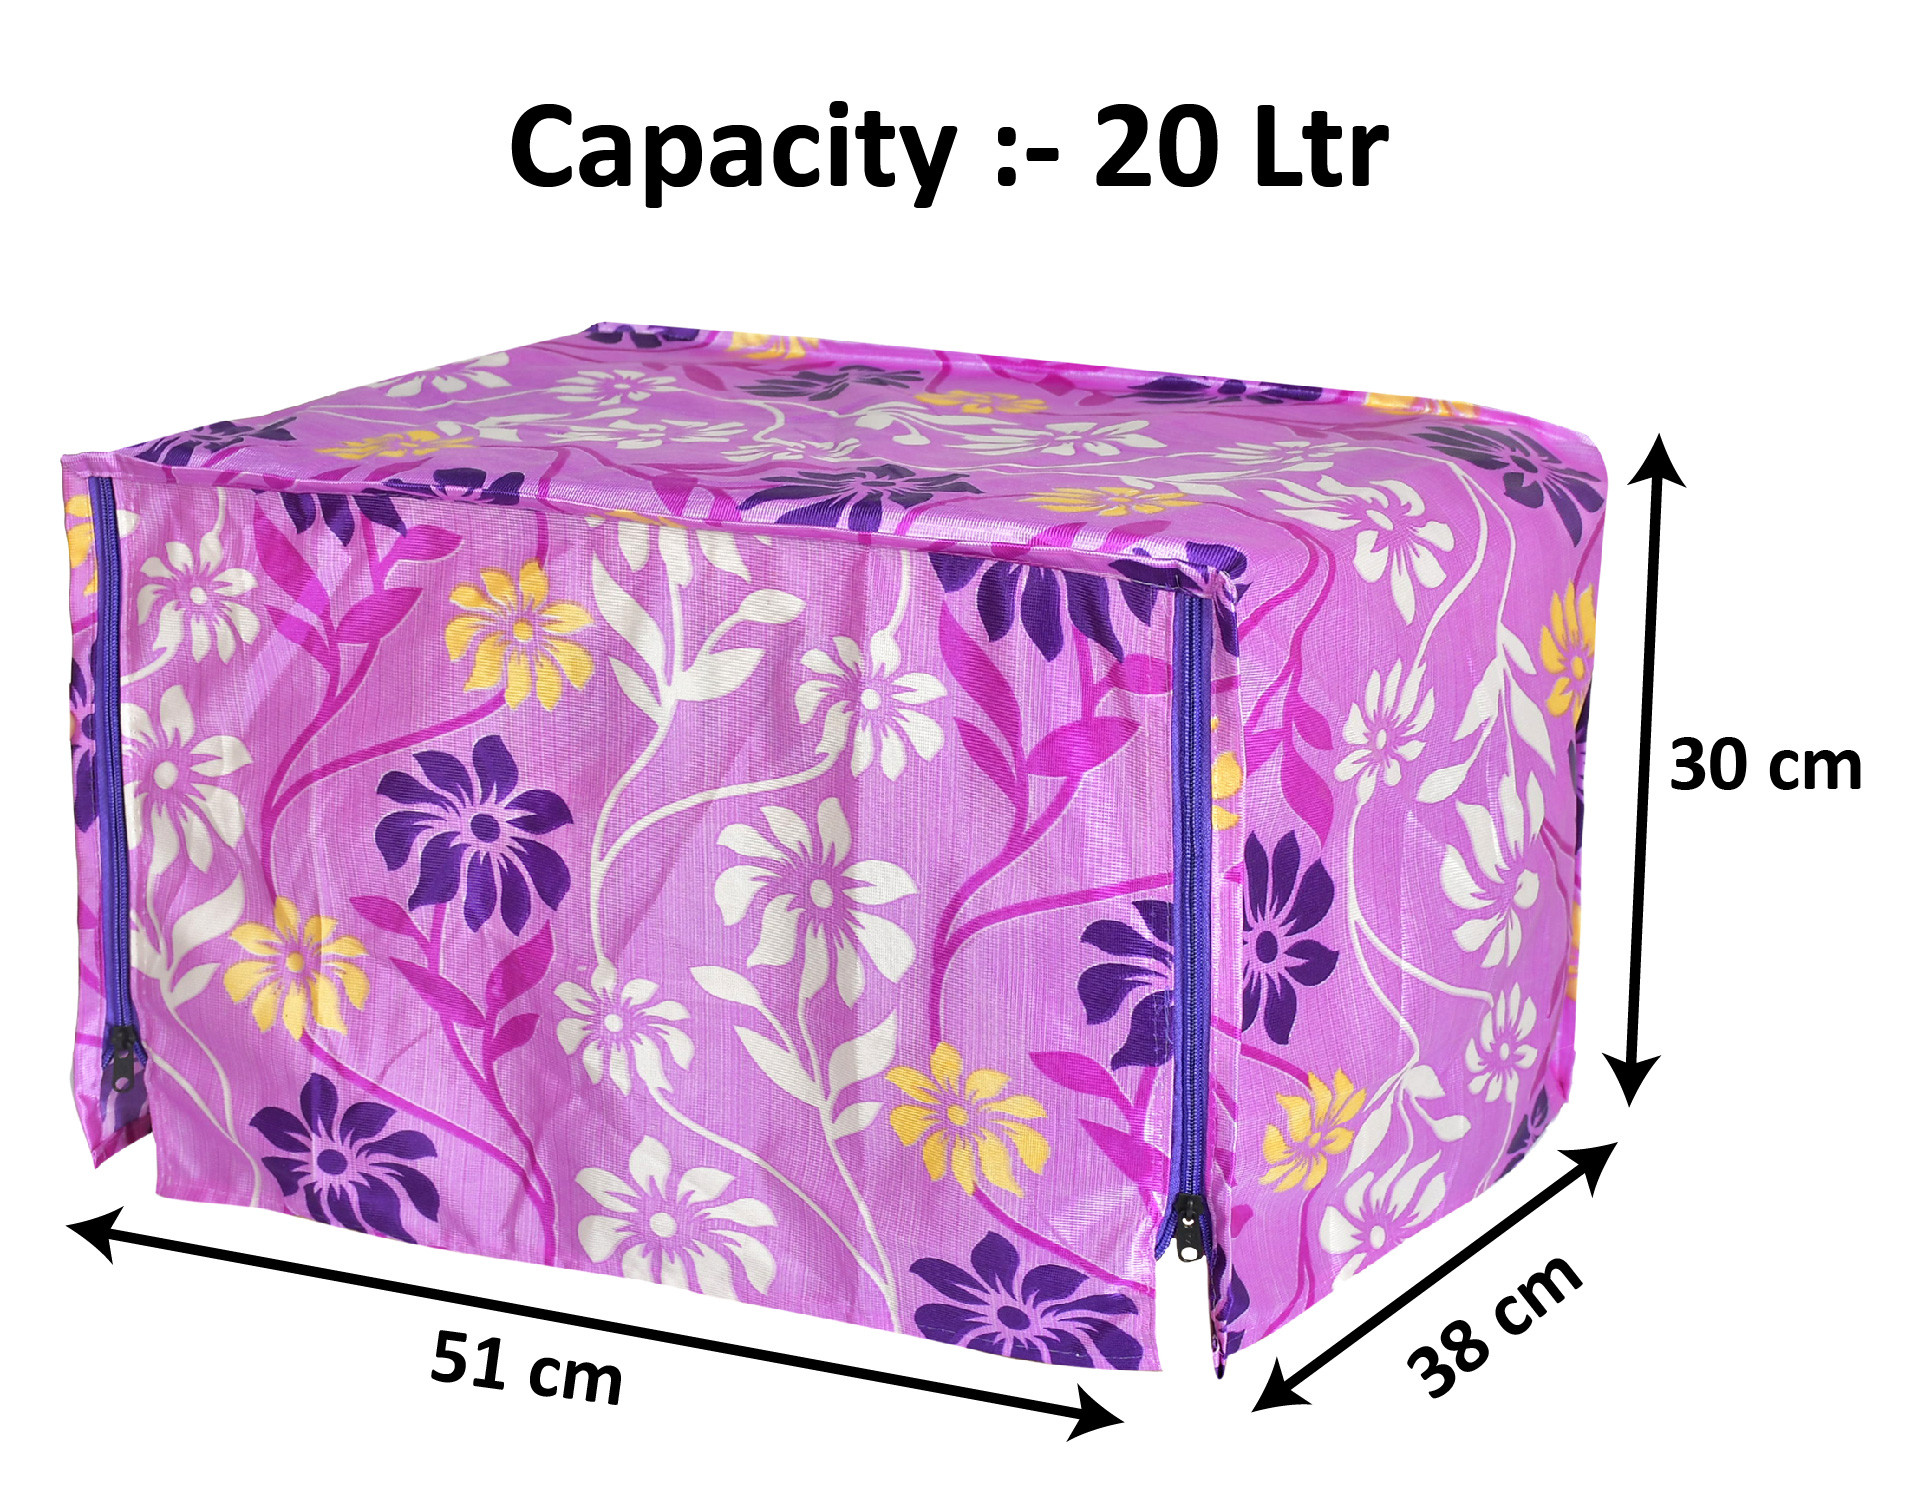 Kuber Industries Polyster Flower Printed Microwave Oven Cover,20 Ltr. (Pink)-HS43KUBMART25905